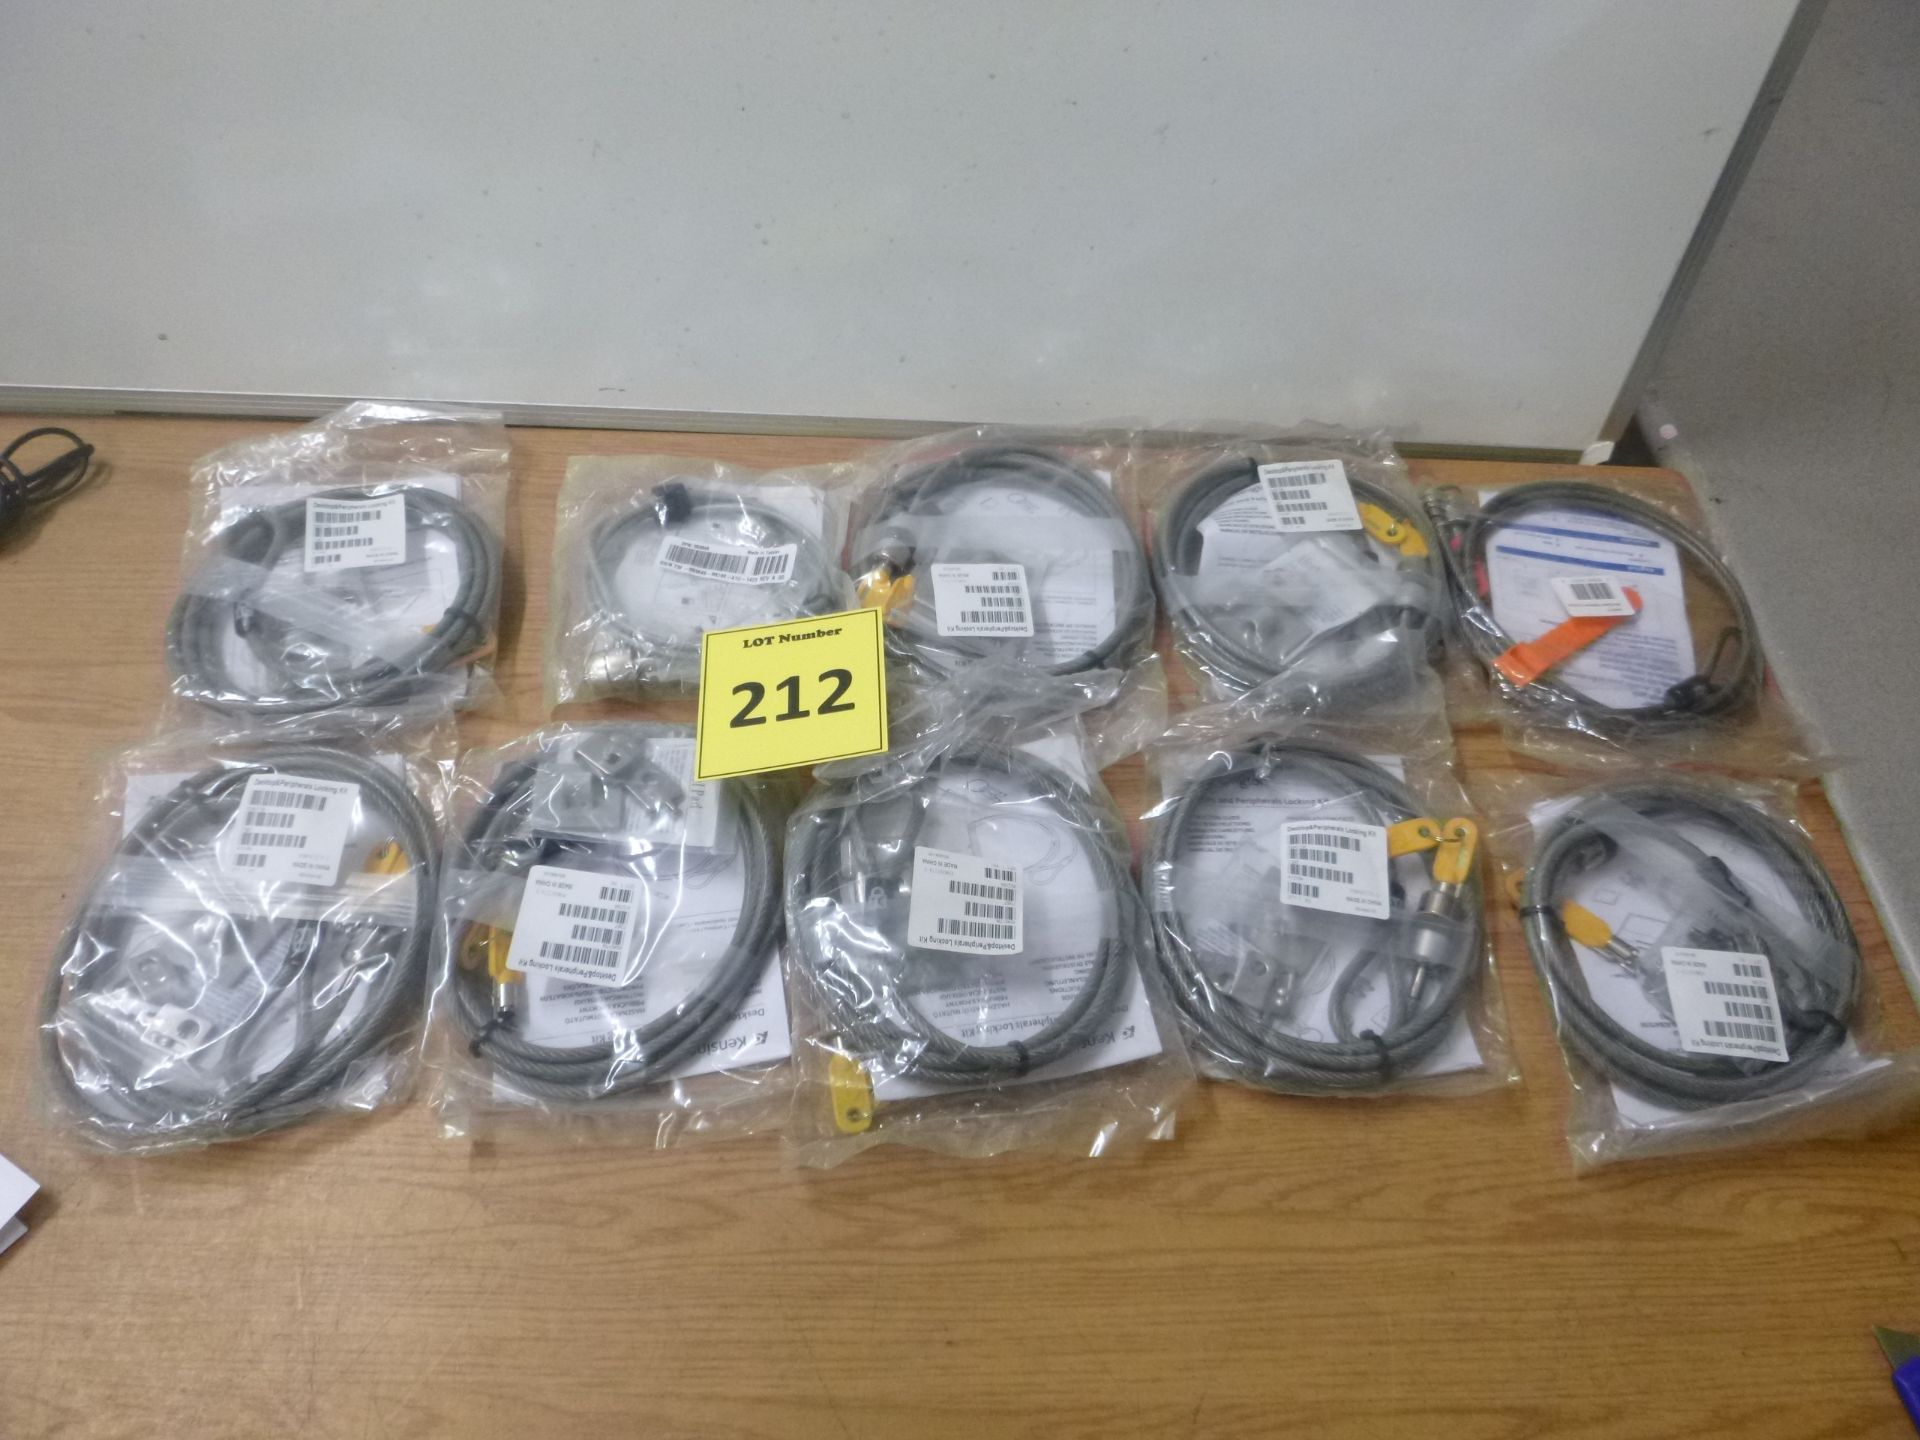 10 X KENSINGTON SECURITY LOCKING CABLES WITH KEYS. NEW IN SEALED BAGS